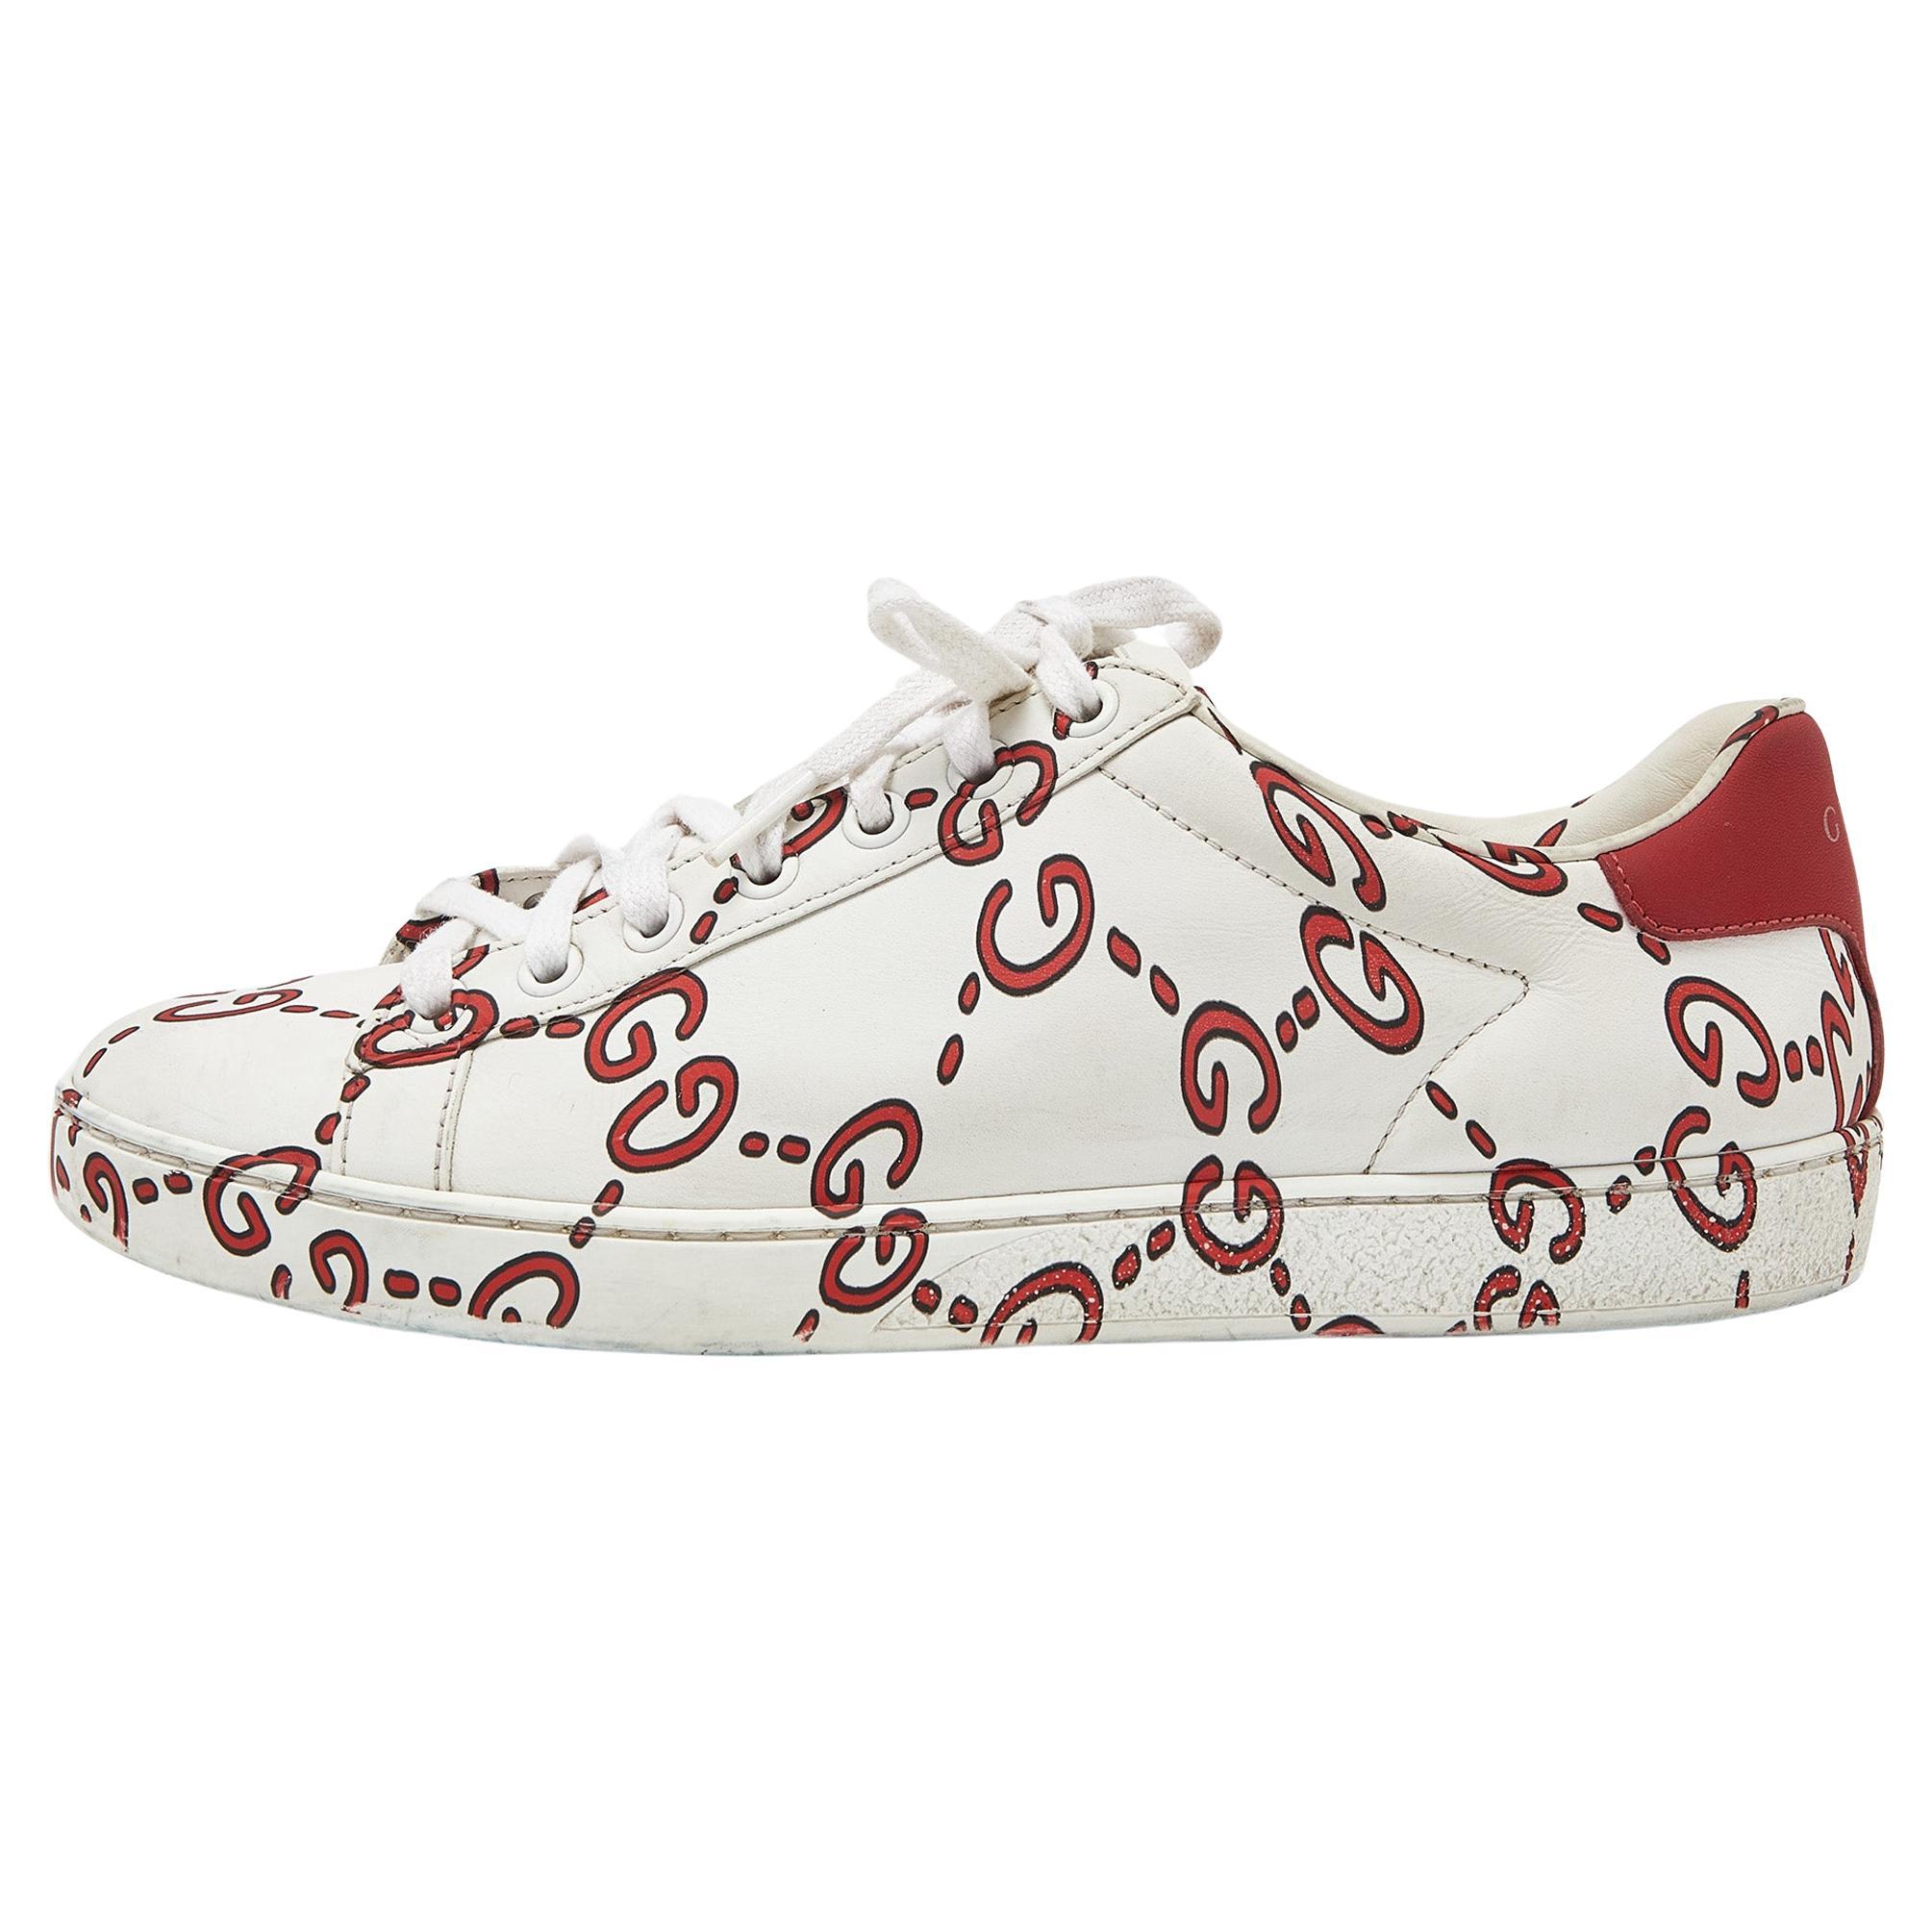 Gucci Tri Color Leather Ghost GG Ace Sneakers Size 37 For Sale